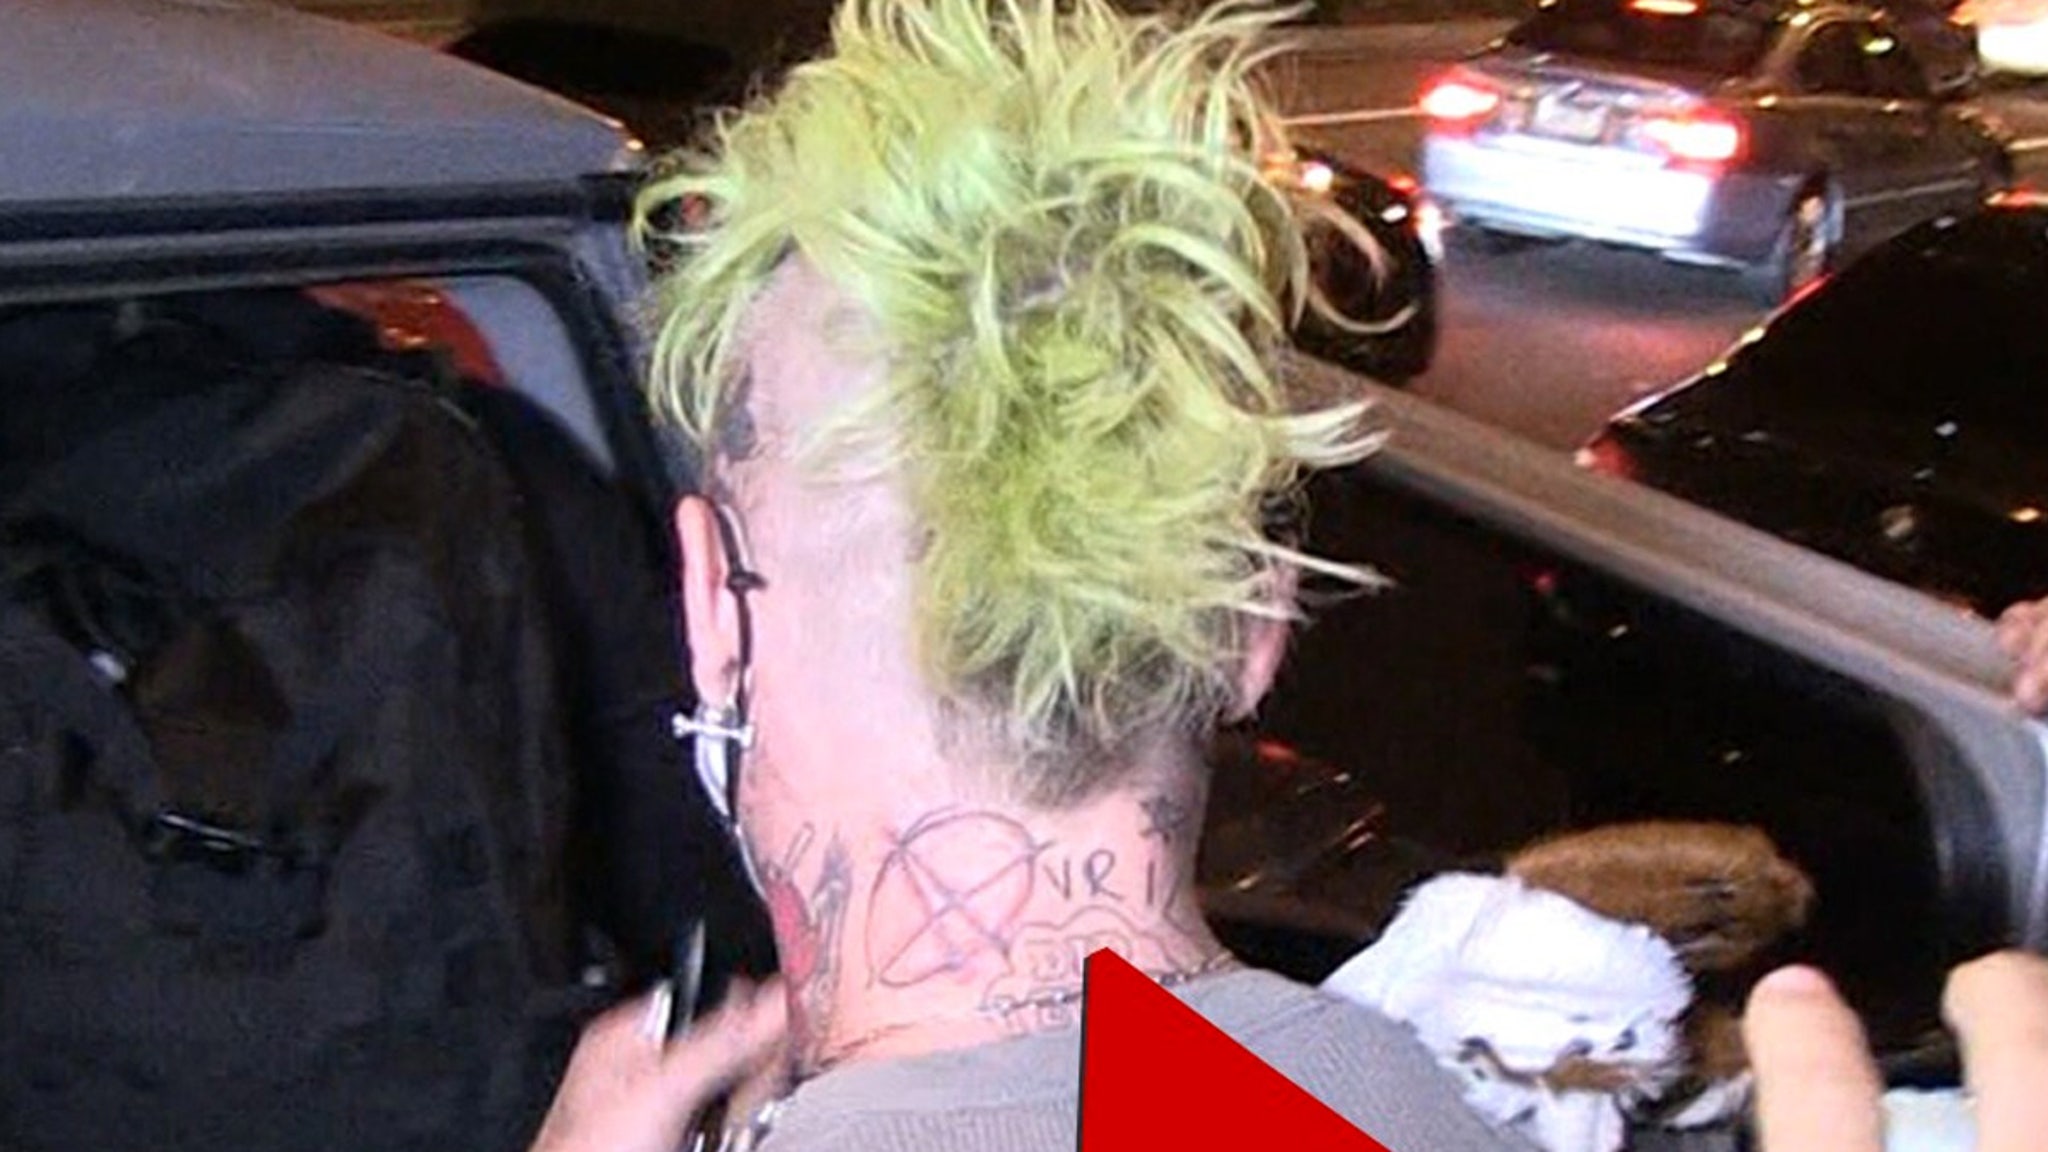 Mod Sun gets ‘Avril’ tattooed on his neck, sign of serious relationship